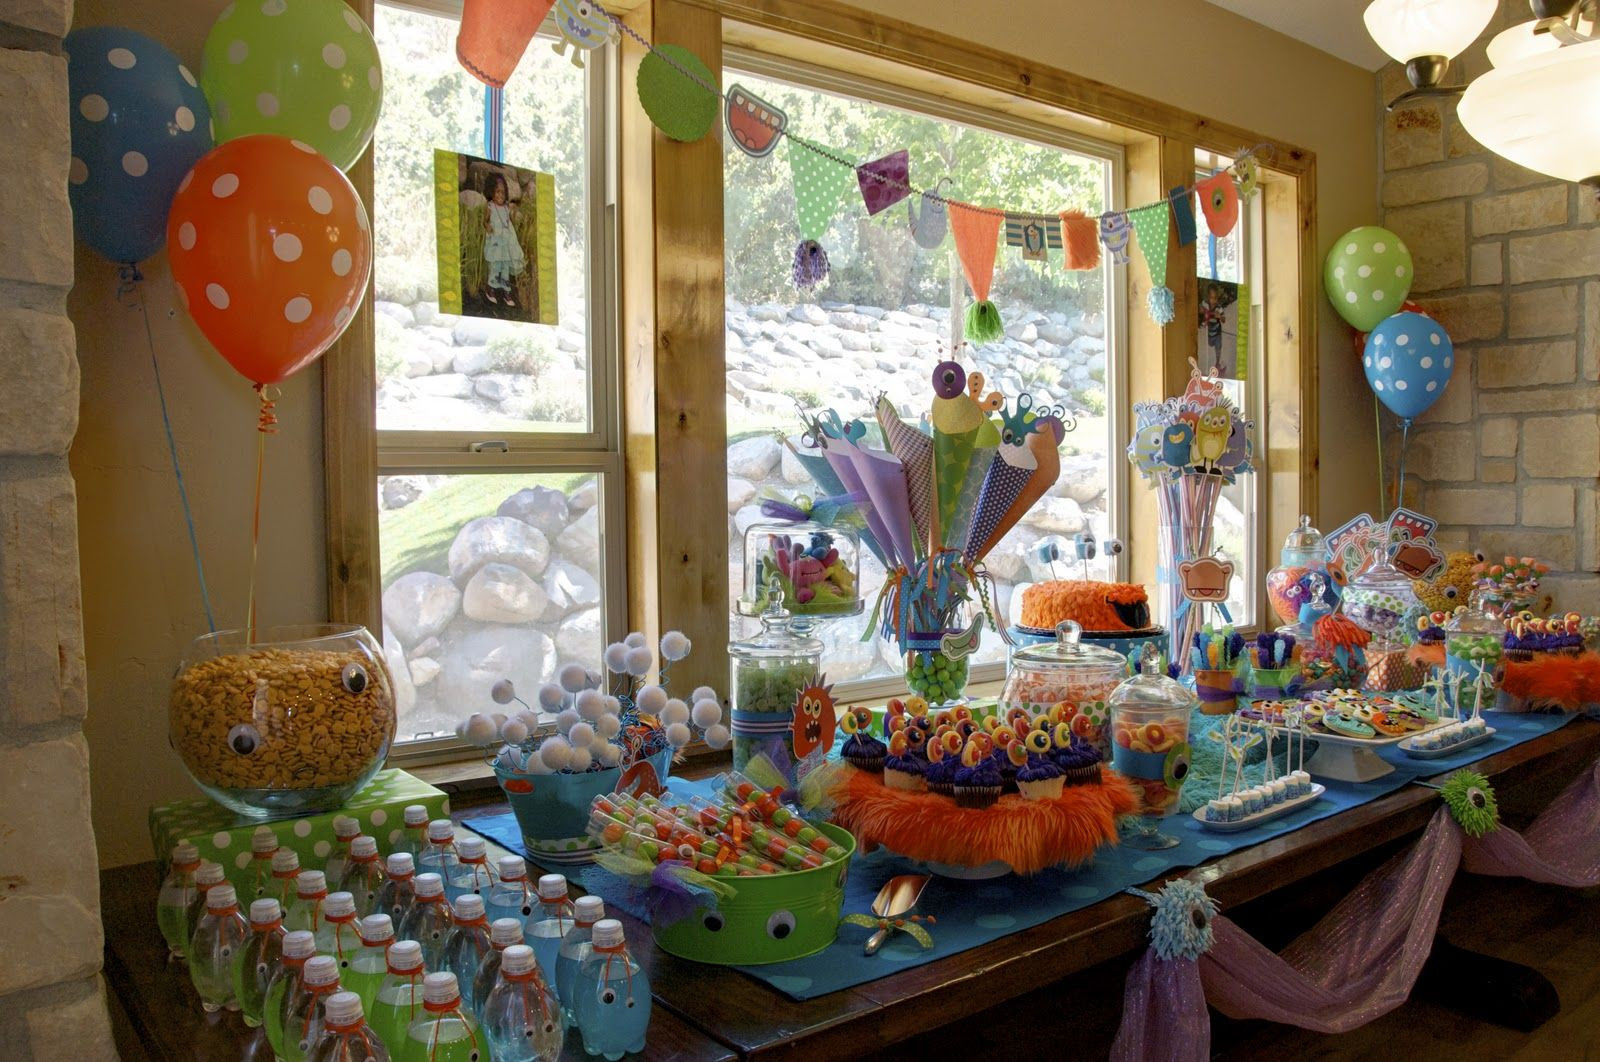 10 Year Old Boy Birthday Party Ideas In Winter
 My friends birthday is in the winter and she wanteâ Š